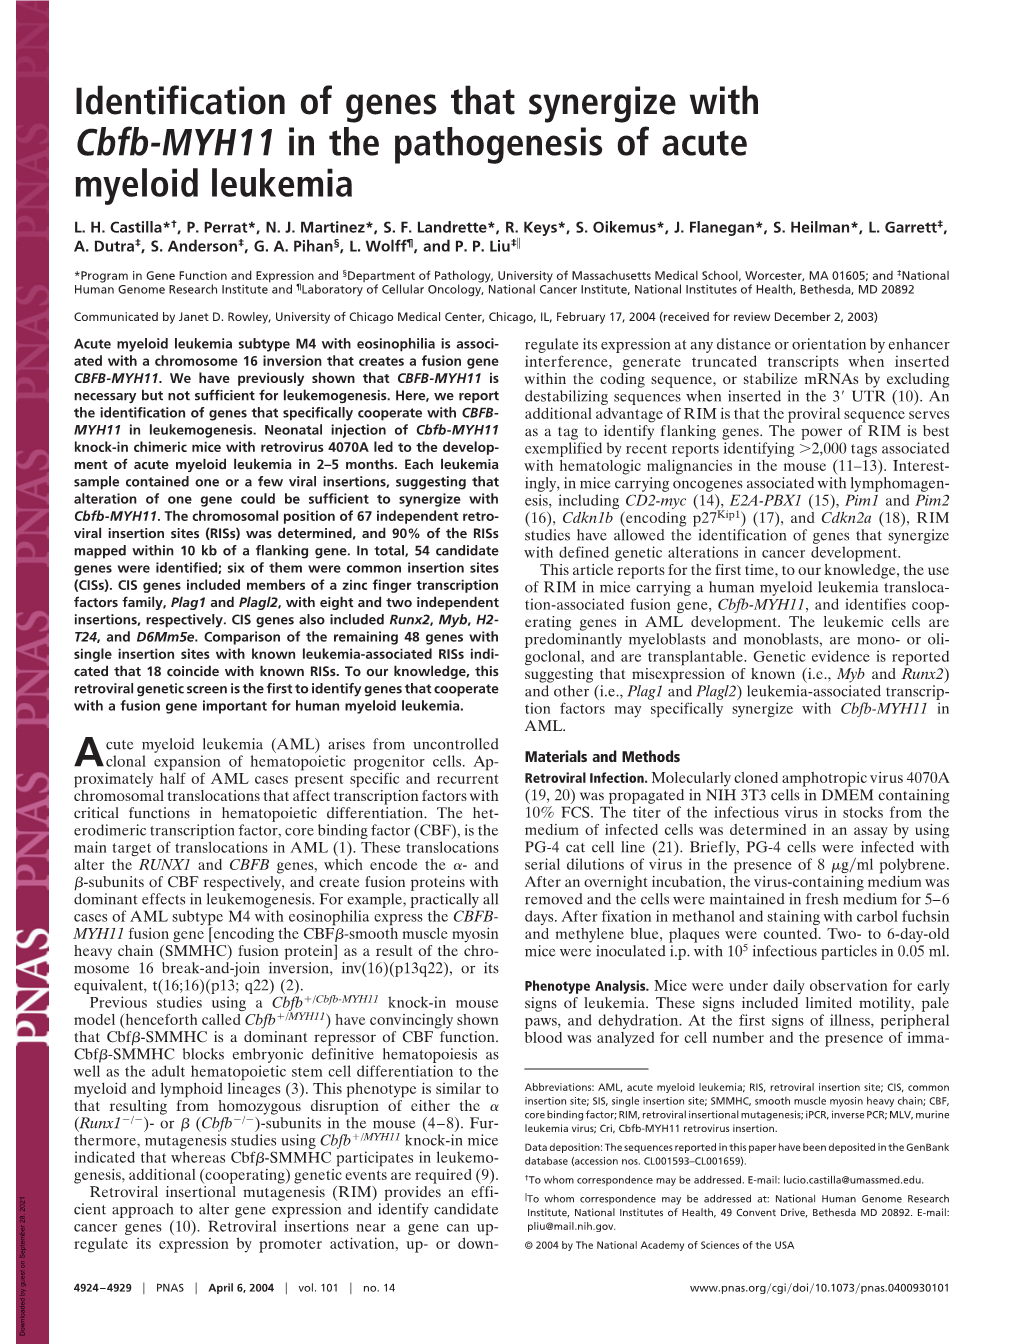 Identification of Genes That Synergize with Cbfb-MYH11 in the Pathogenesis of Acute Myeloid Leukemia